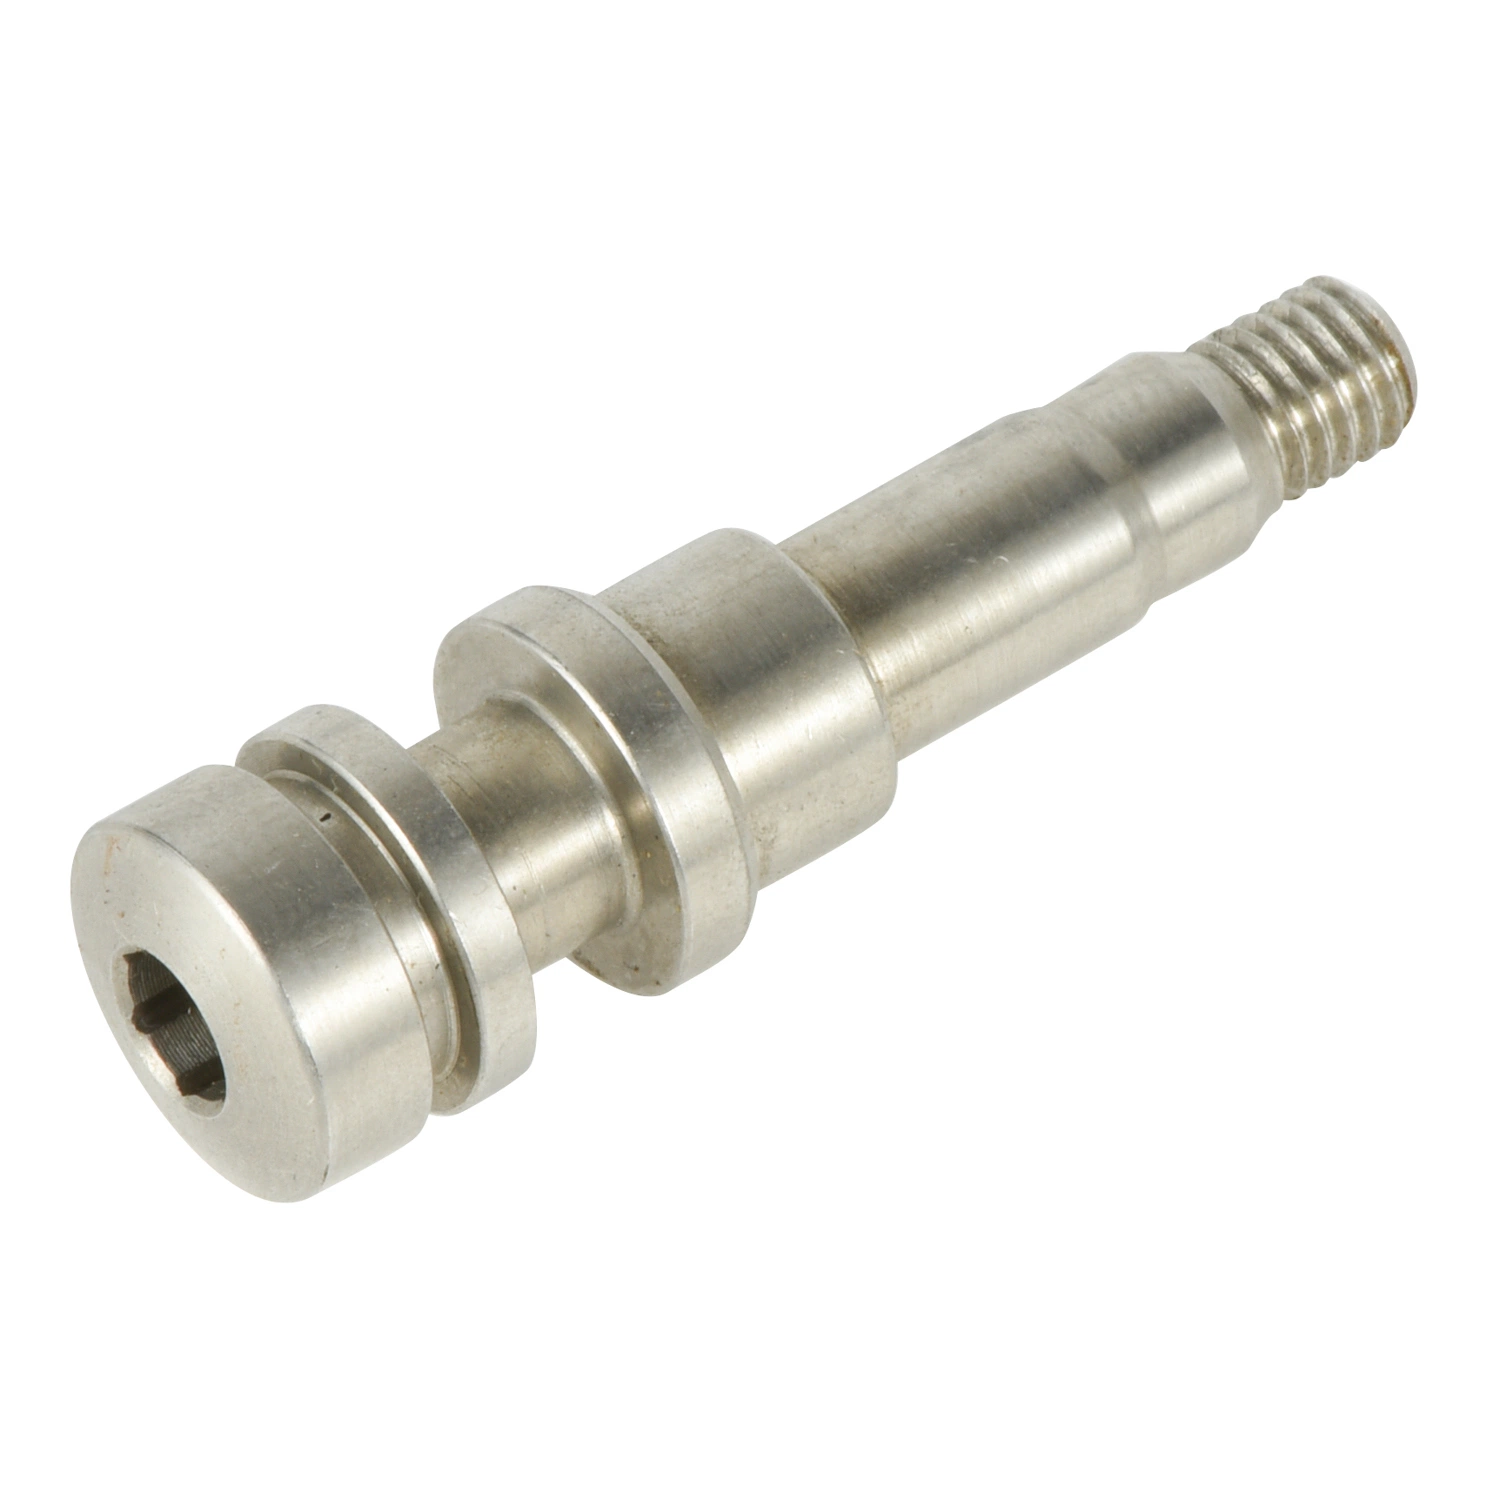 Stainless Steel Wire Rope Swage End Connectors Hardware Fitting Wood Thread Stud Swageless Terminal